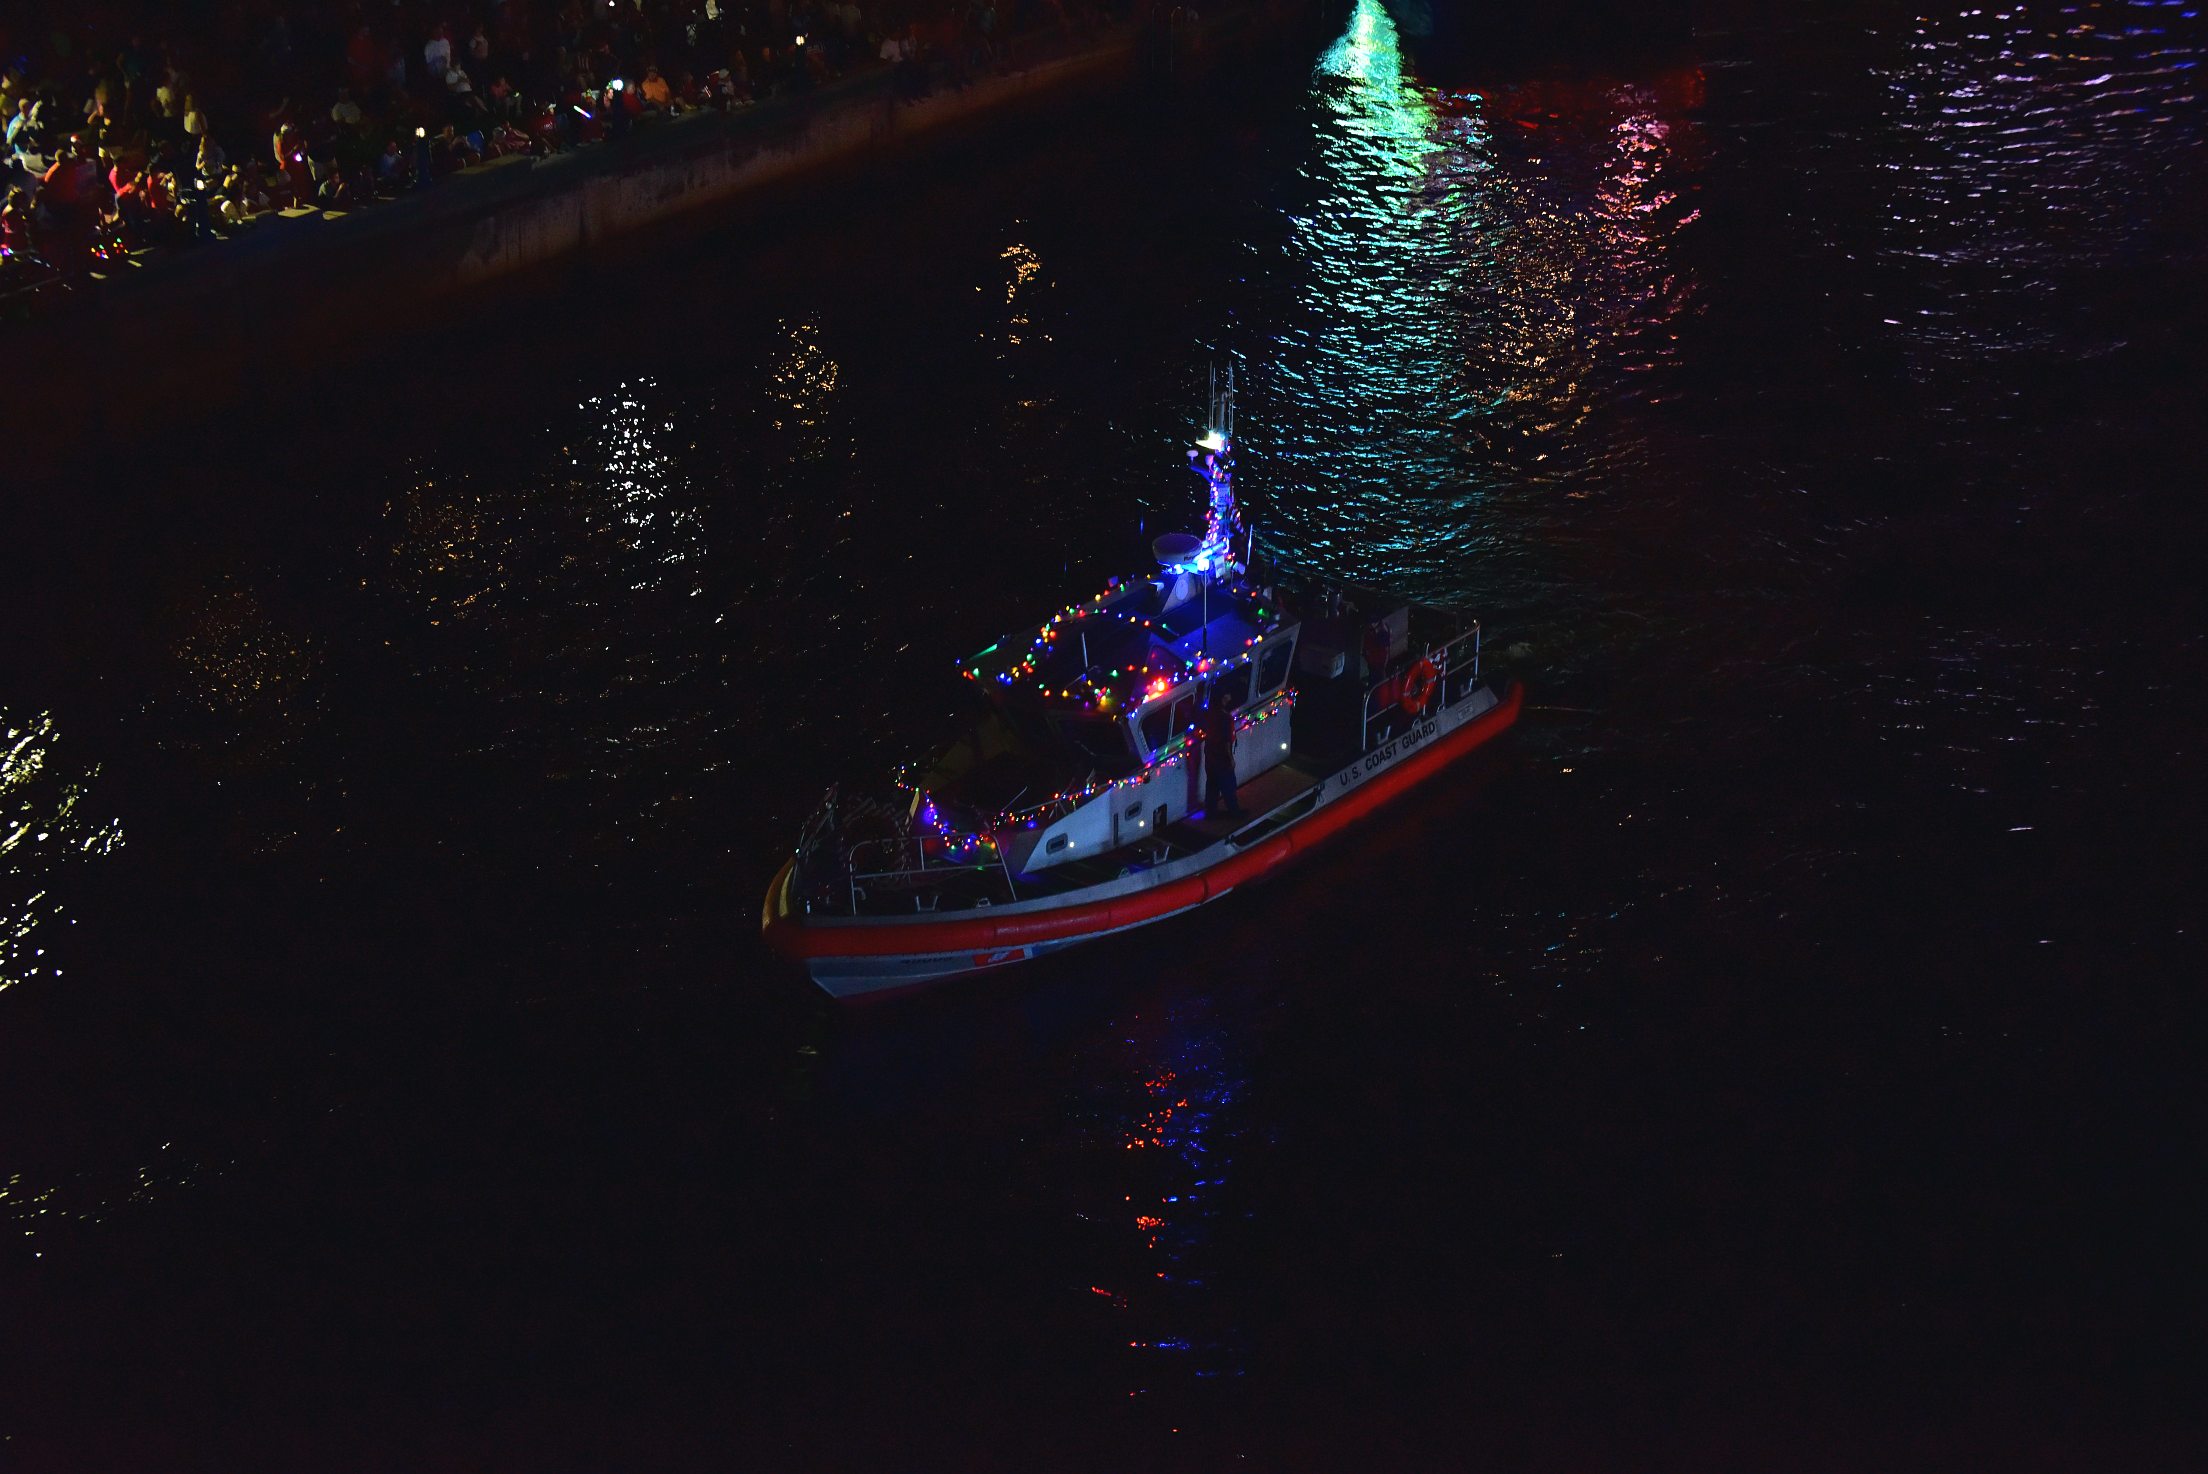 United States Coast Guard Search and Rescue, boat number 95 in the 2021 Winterfest Boat Parade